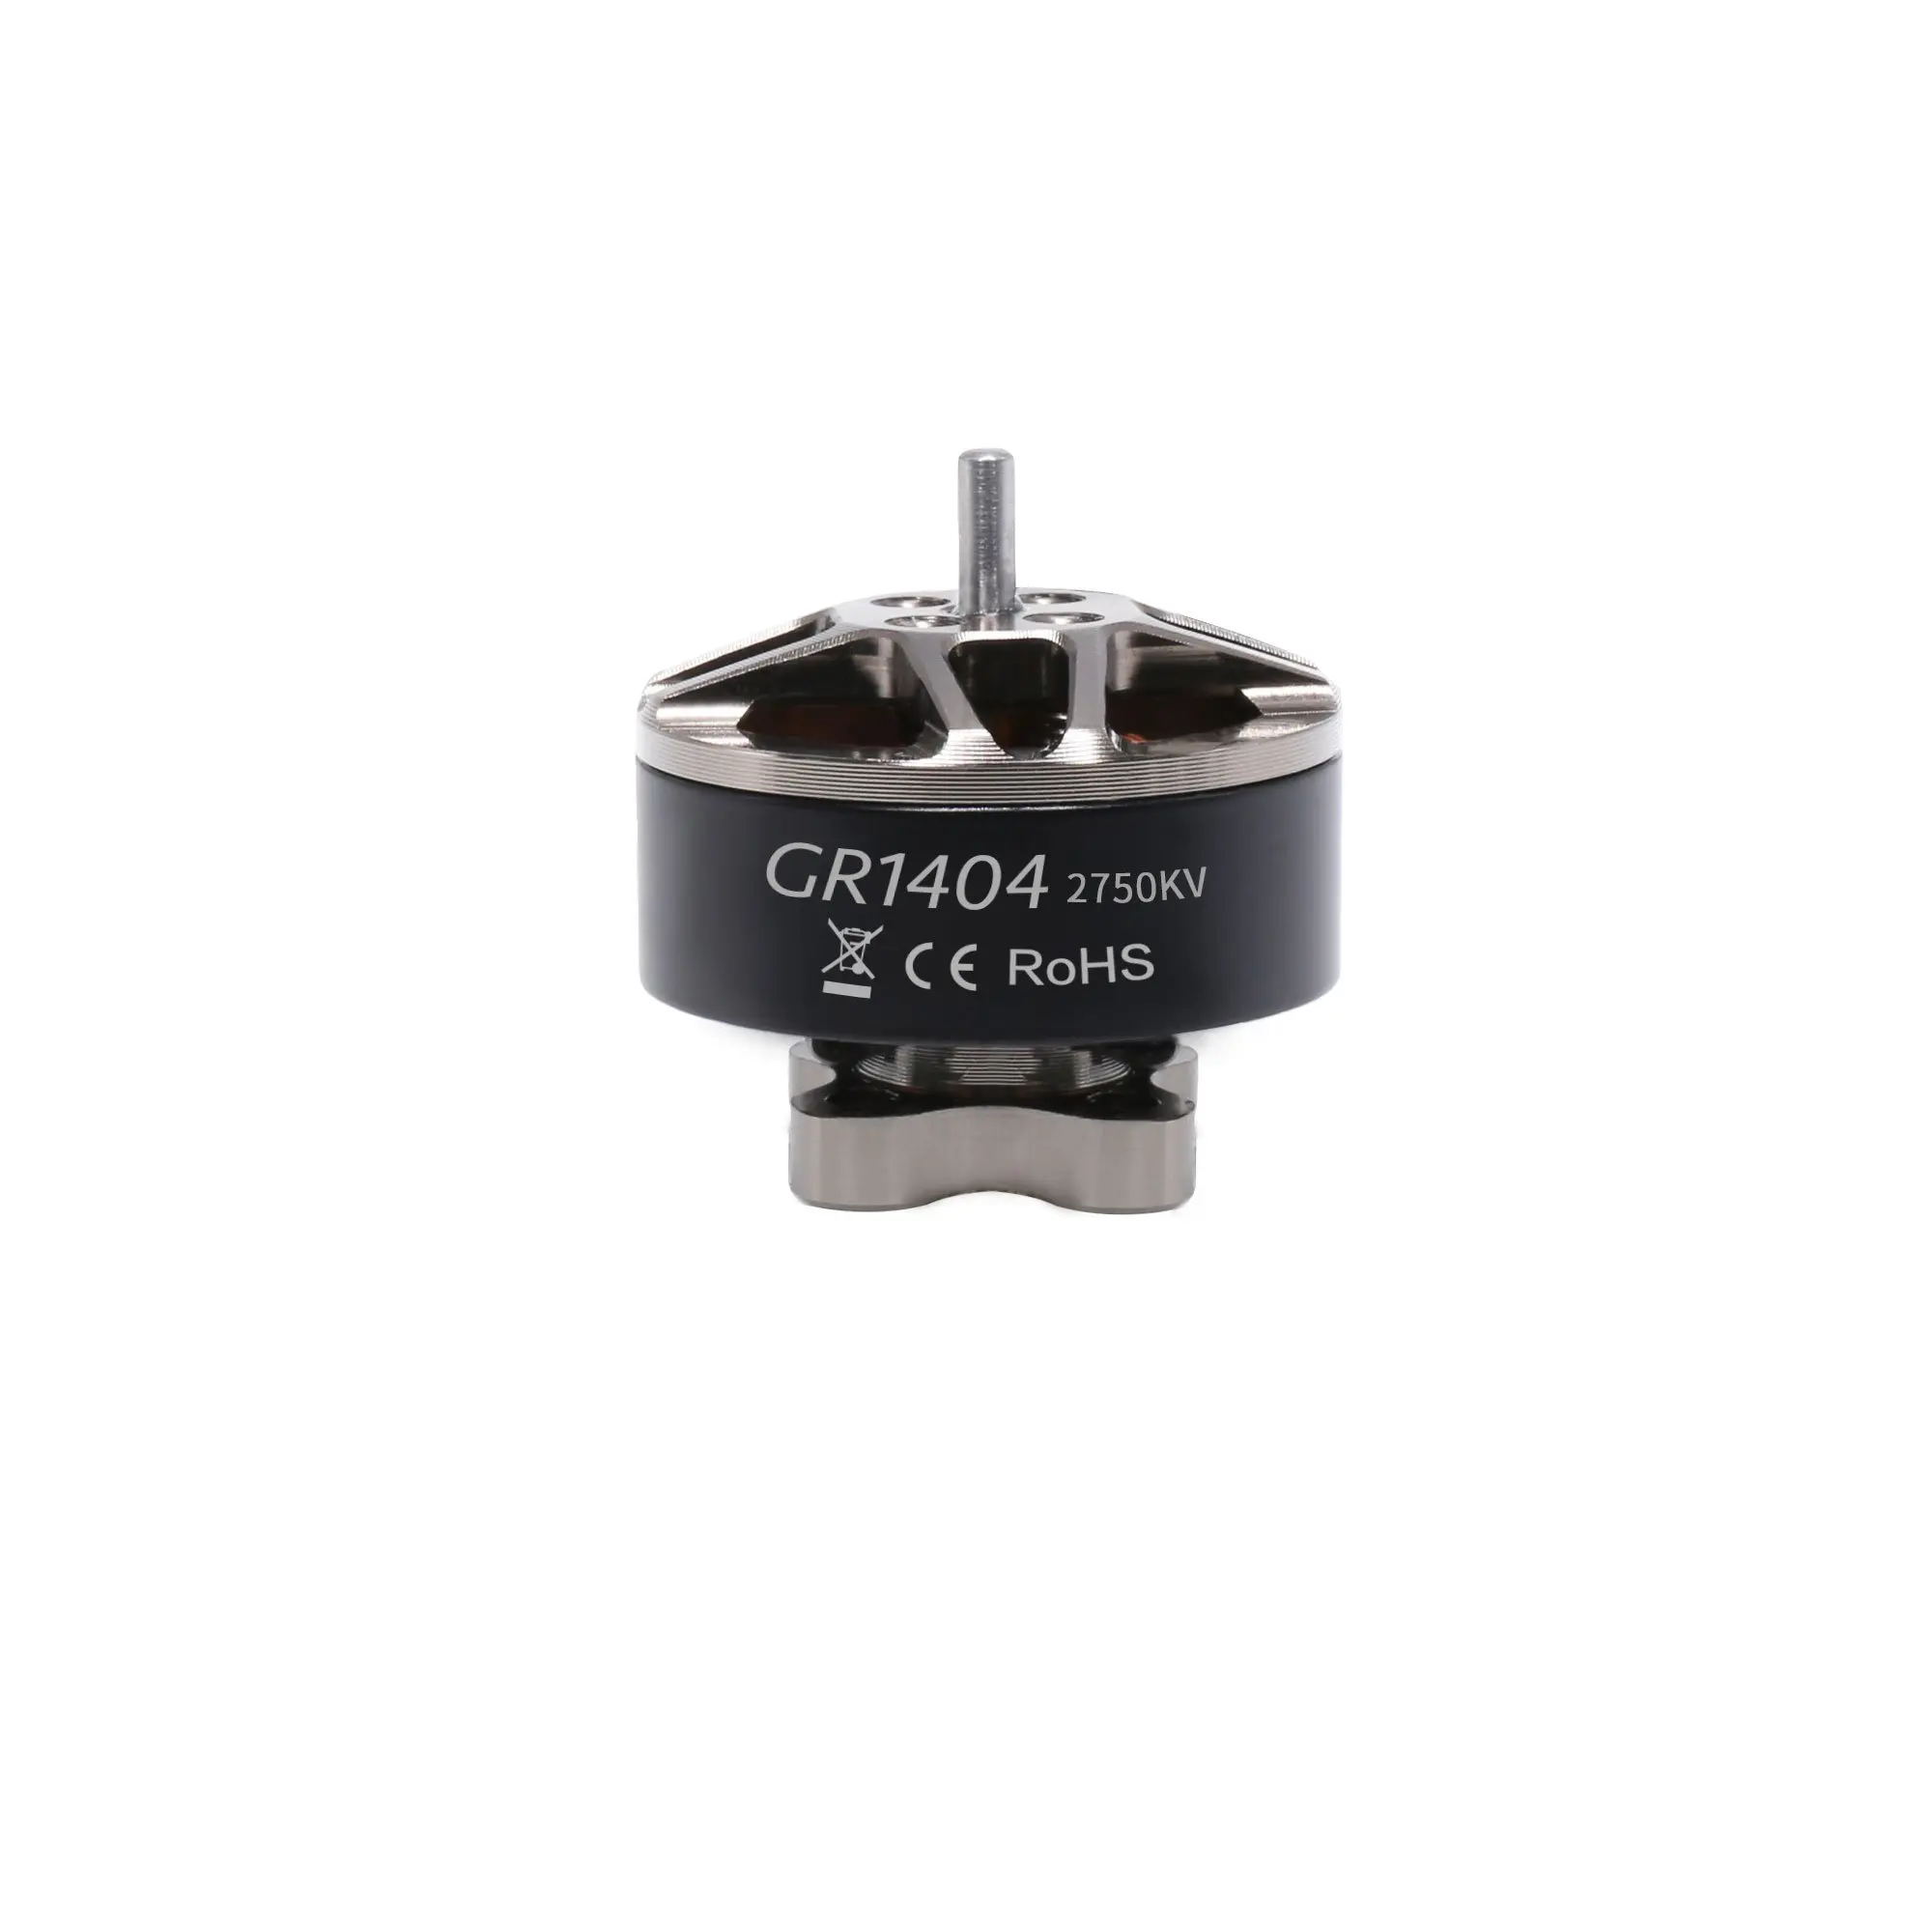 GEPRC GR1404 2750kv Motor Suitable For Crocodile baby4 And Other Series Drone For DIY RC FPV Quadcopter Freestyle Drone Parts